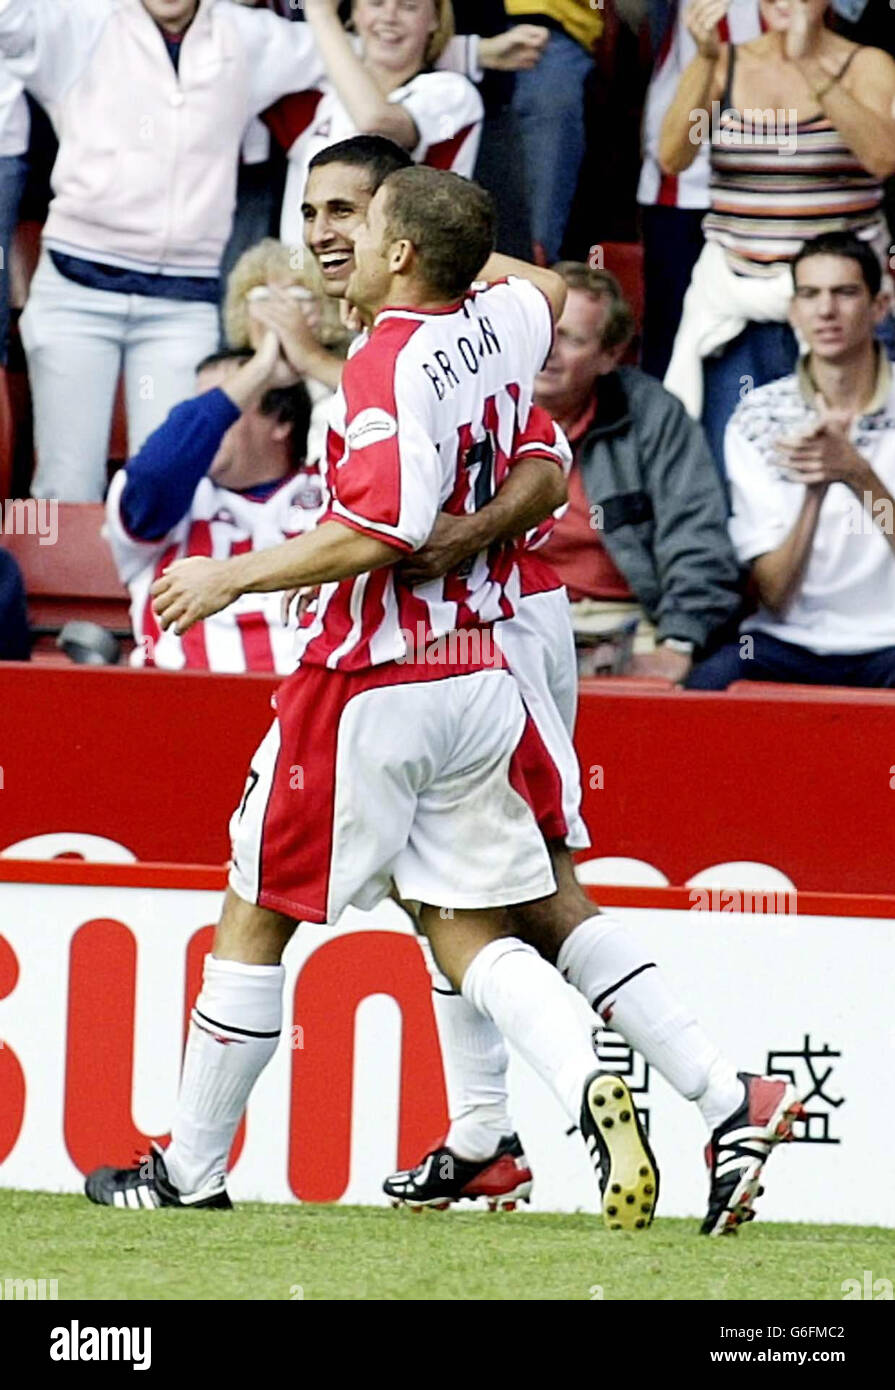 Sheffield United's Jack Lester (behind) is congratulated by team-mate Michael Brown after scoring the winning goal against Coventry City, during their Nationwide Division One match at Sheffield's Bramall Lane ground. Sheffield United won 2-1. NO UNOFFICIAL CLUB WEBSITE USE. Stock Photo